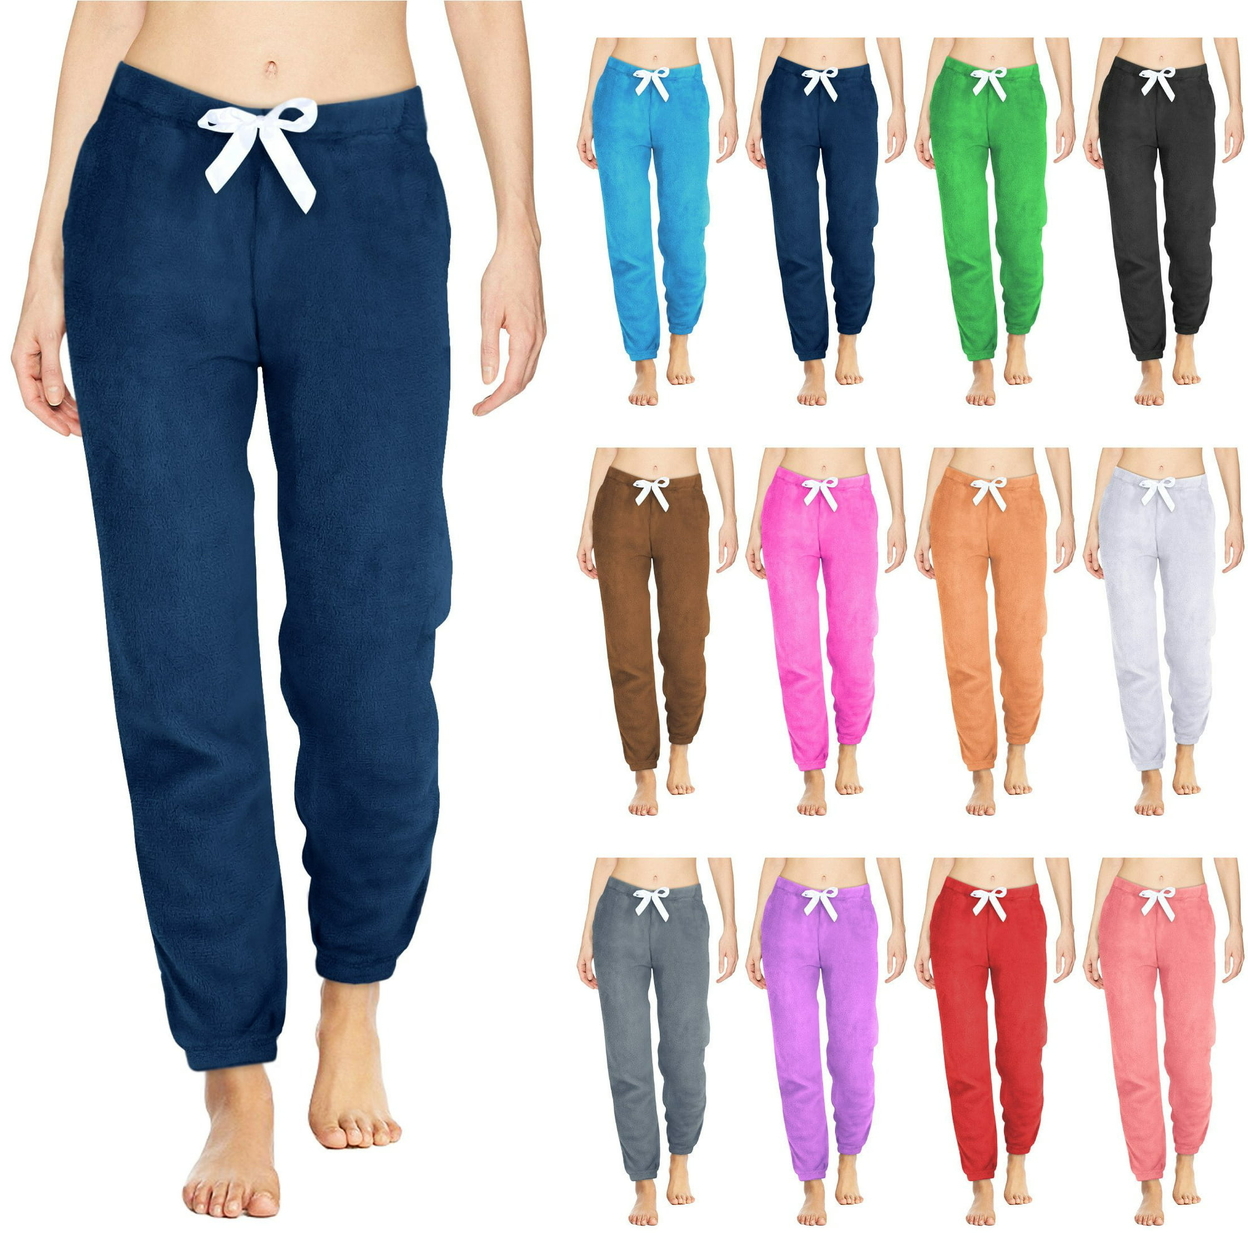 Multi-Pack: Women's Solid & Printed Ultra-Soft Comfy Stretch Micro-Fleece Pajama Lounge Pants - 3-pack, Small, Animal